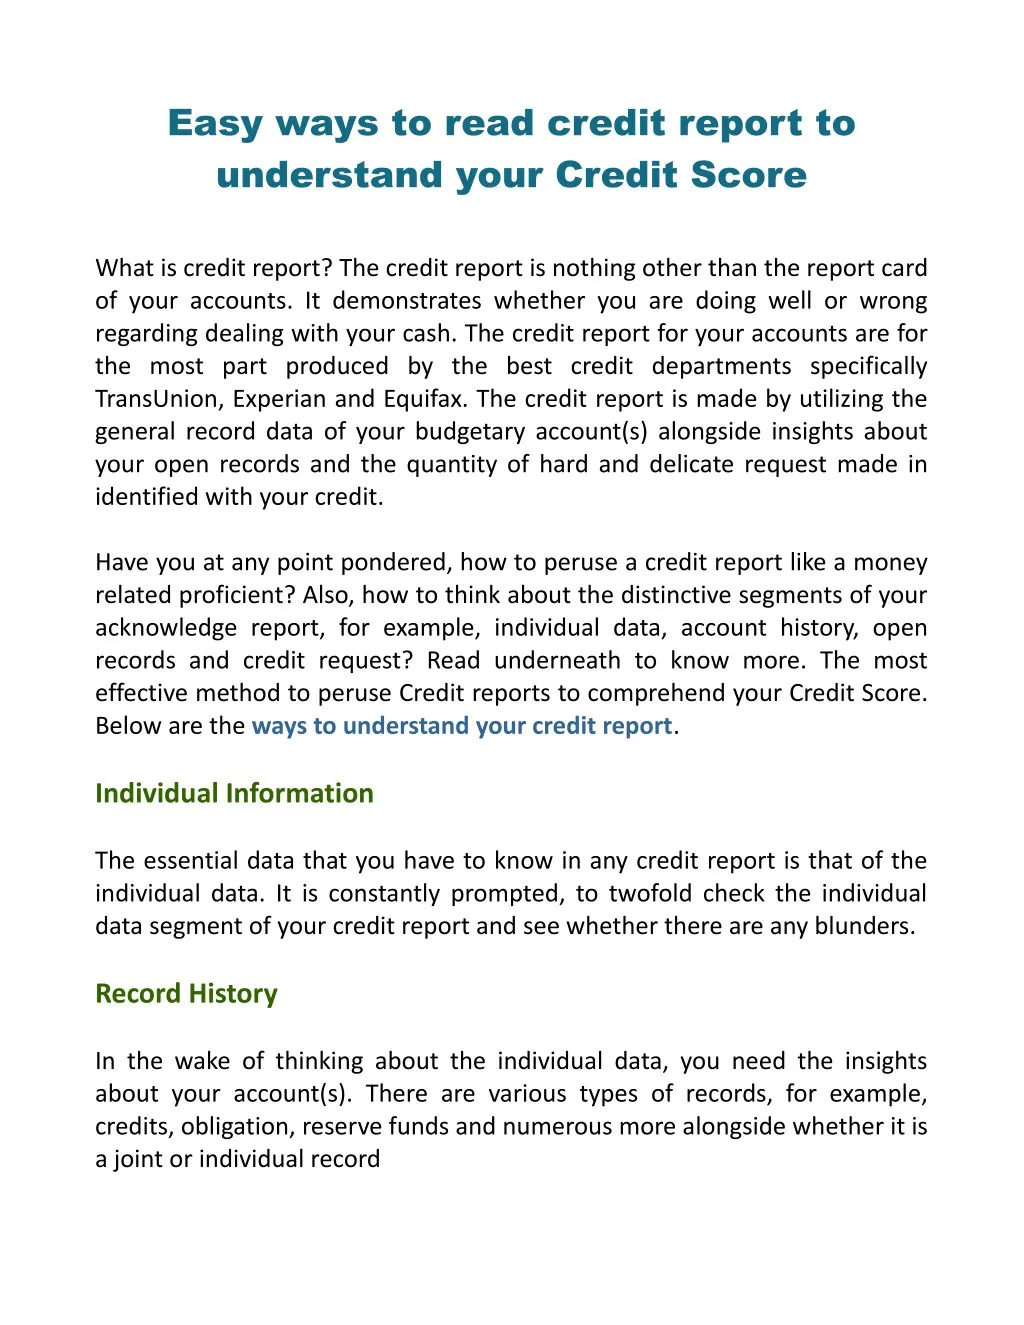 easy ways to read credit report to understand